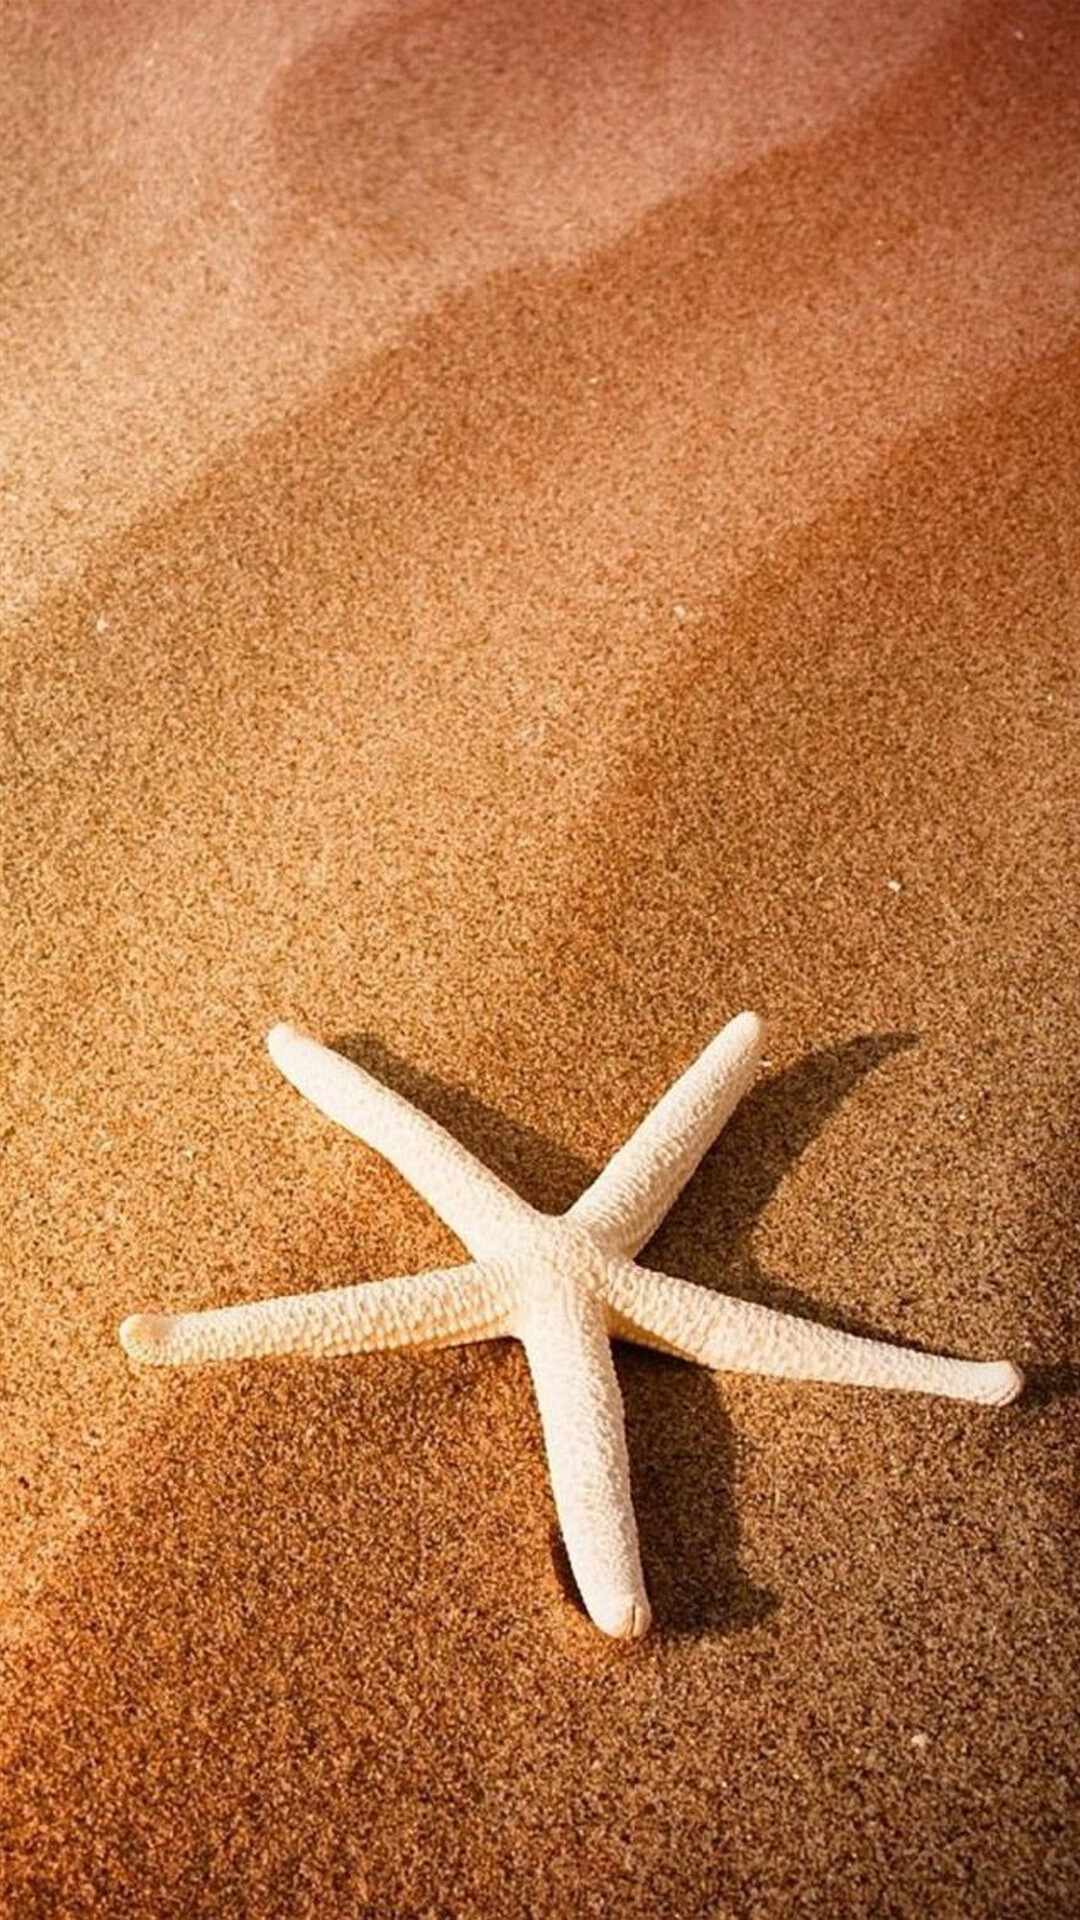 Starfish: Android Starfish Wallpaper posted by Ryan Sellers. 1080x1920 Full HD Wallpaper.